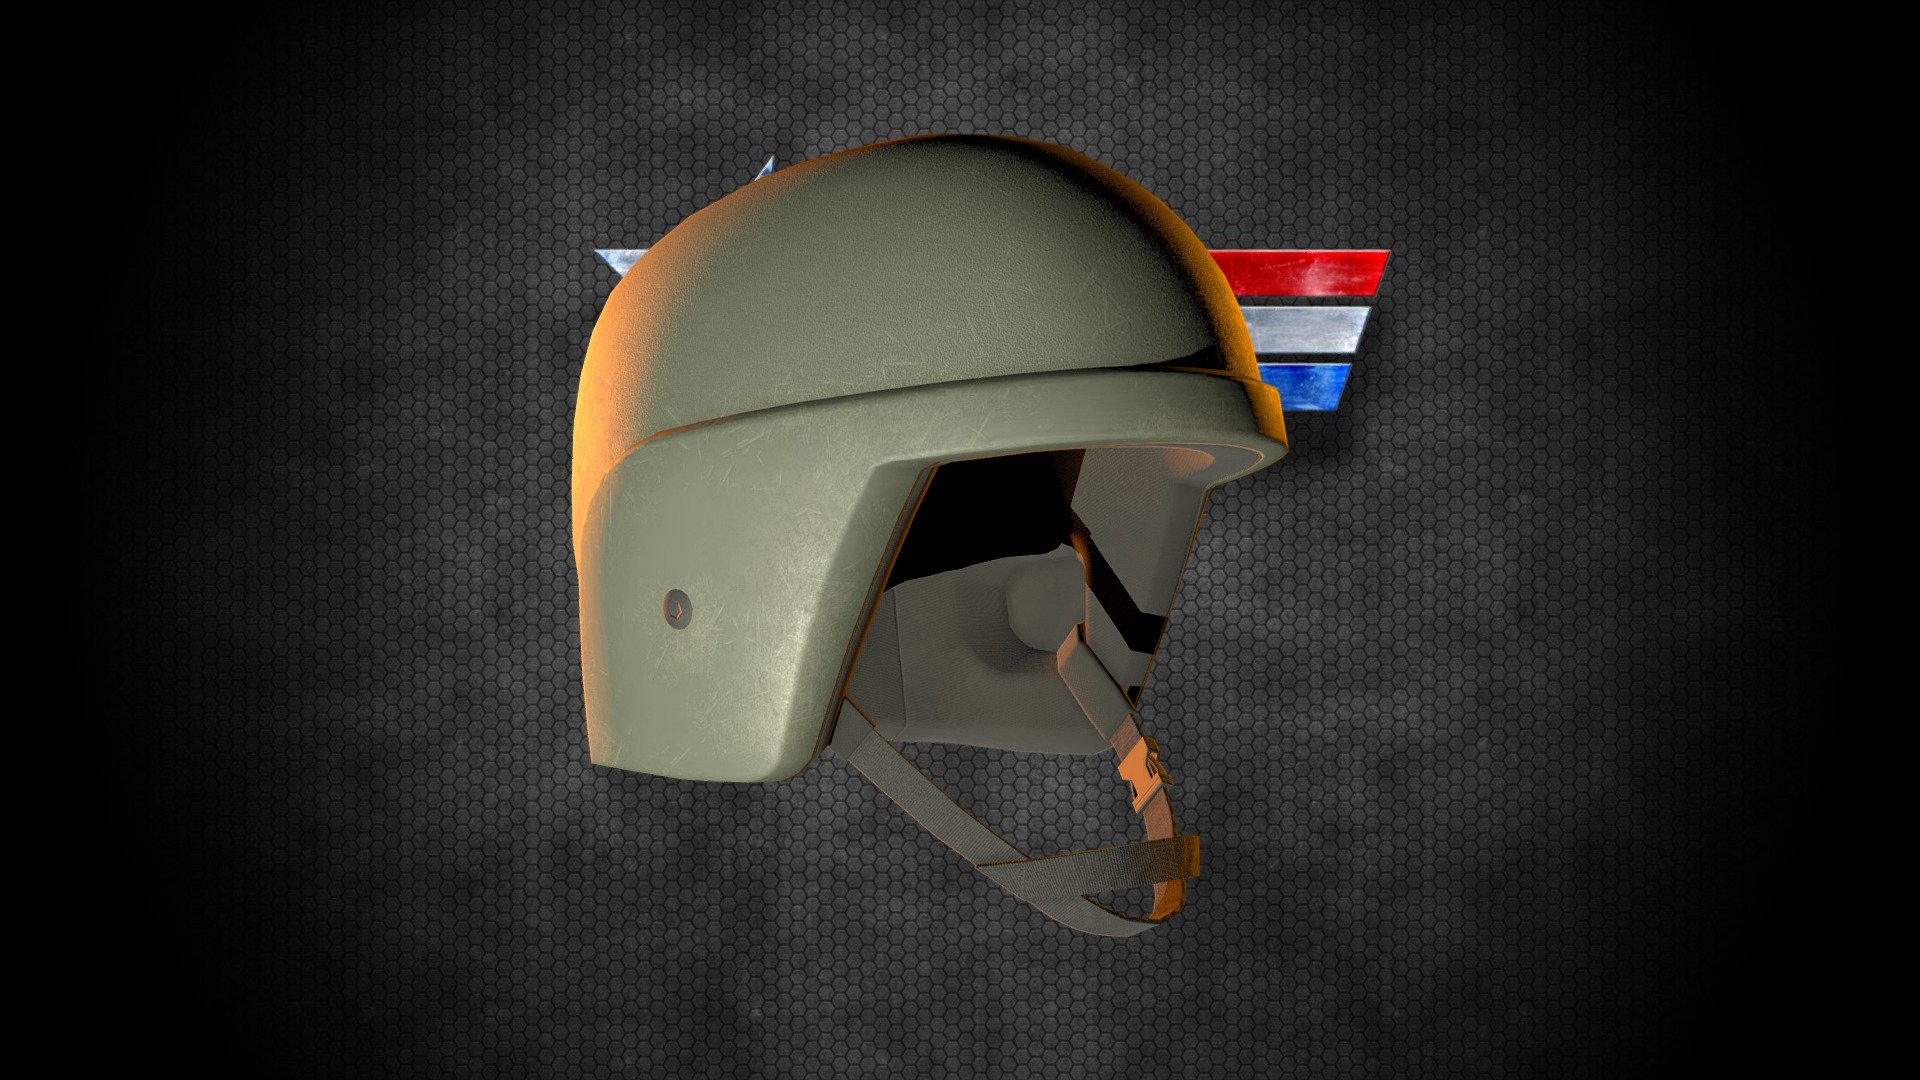 The Advanced Multi-Function Combat Helmet used by the 61st Joint Task Force. 

Inspired by your favorite action figures' headgear, the 61JTF AMFCH is combat ready!

This low-poly game model has been battle tested, and is part of my Arma 3 mod: Fight for Freedom! 
This is just the model and its textures; there are no game-specific files included.

Created using 3D Studio Max (3DSMAX), Substance Painter, and Photoshop.
Painted for non-PBR Spec/Gloss game engines. PBR Metal/Rough coming soon!
If you might be interested in exclusive models, shoot me a message to talk commissions 3d model